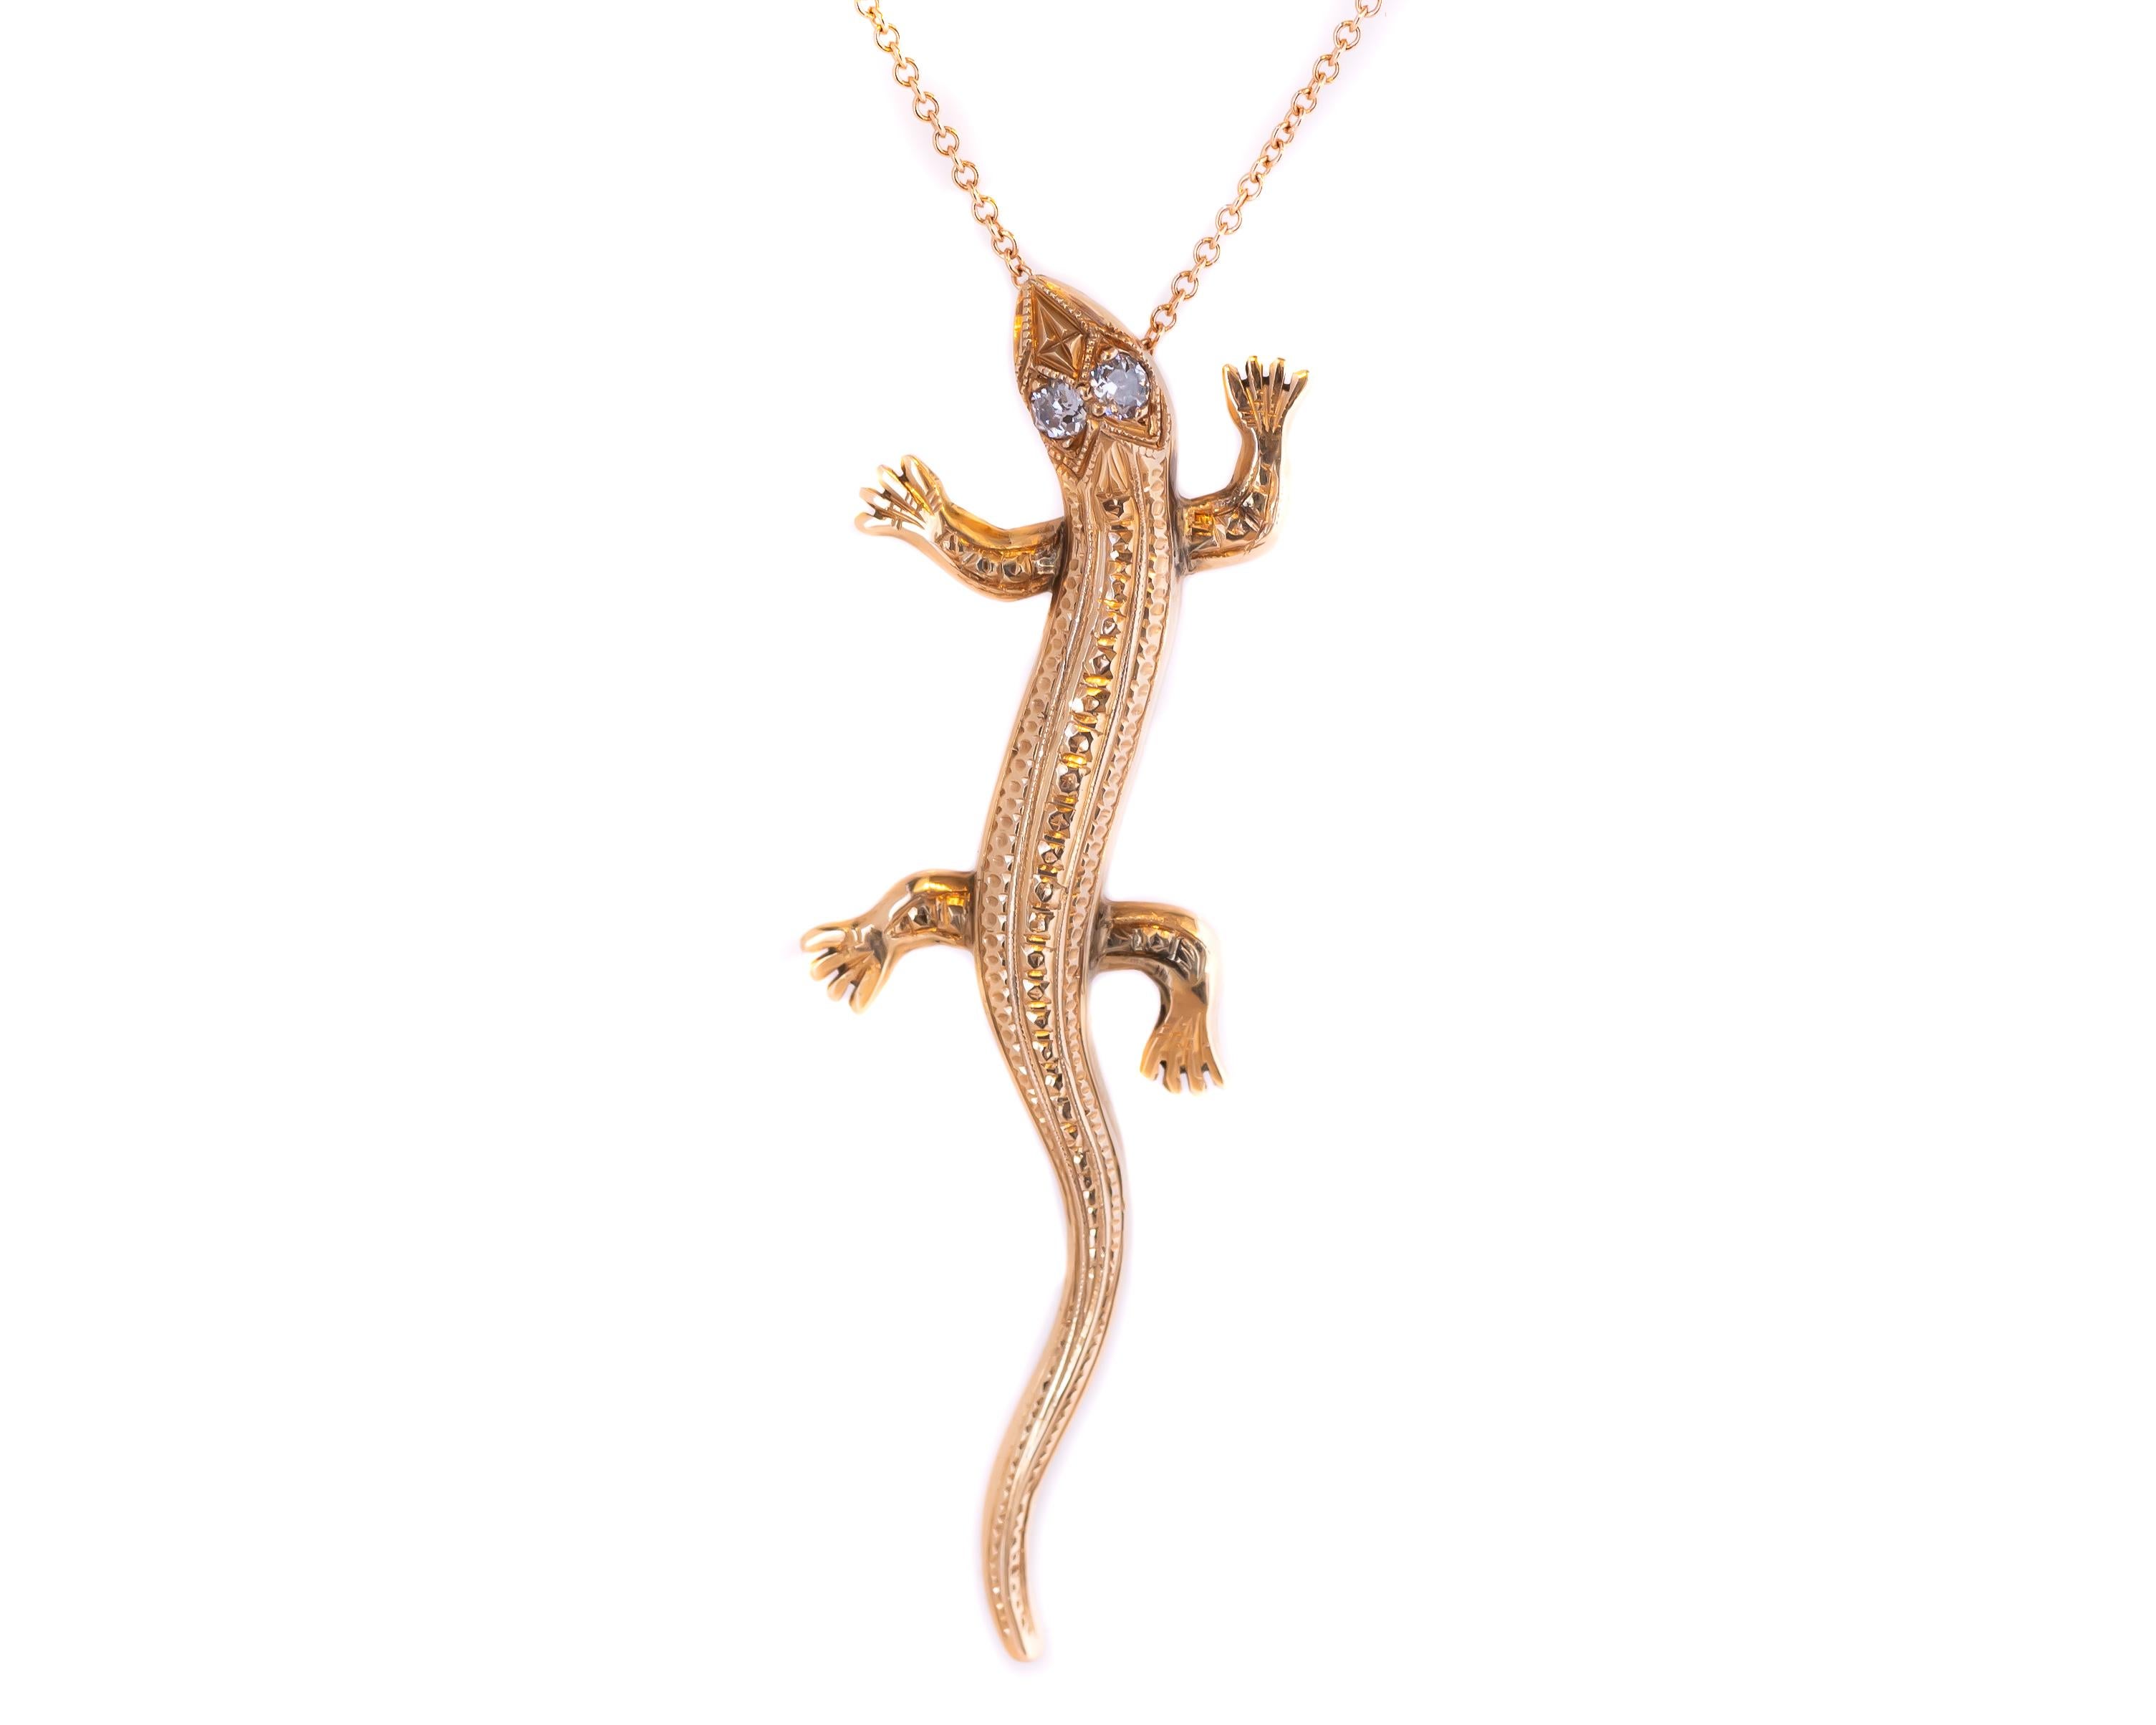 Vintage Chameleon Necklace crafted in 18 karat Rose Gold and Diamonds

Features:
2 Old Mine Cushion cut Diamonds and 18 karat Rose Gold Chameleon Pendant with 2 Diamond Eyes. The upper surface of the pendant is embellished with simple, elegant